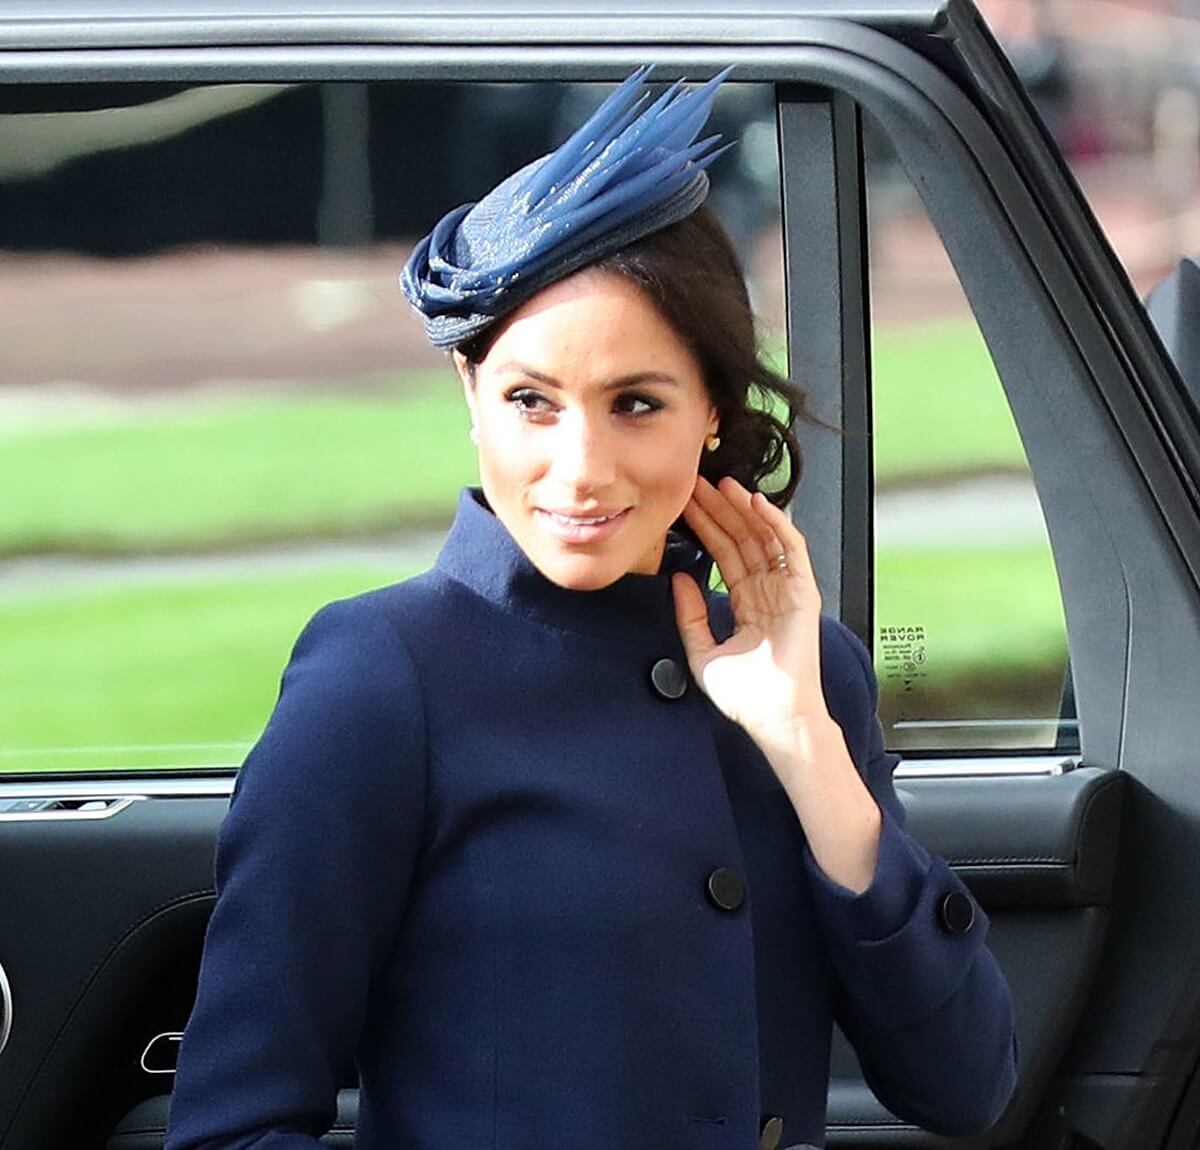 Meghan Markle, who received backlash after mock curtsy prompted video of best royal wedding curtsies, arrives to attend the wedding of Britain's Princess Eugenie at St George's Chapel, Windsor Castle